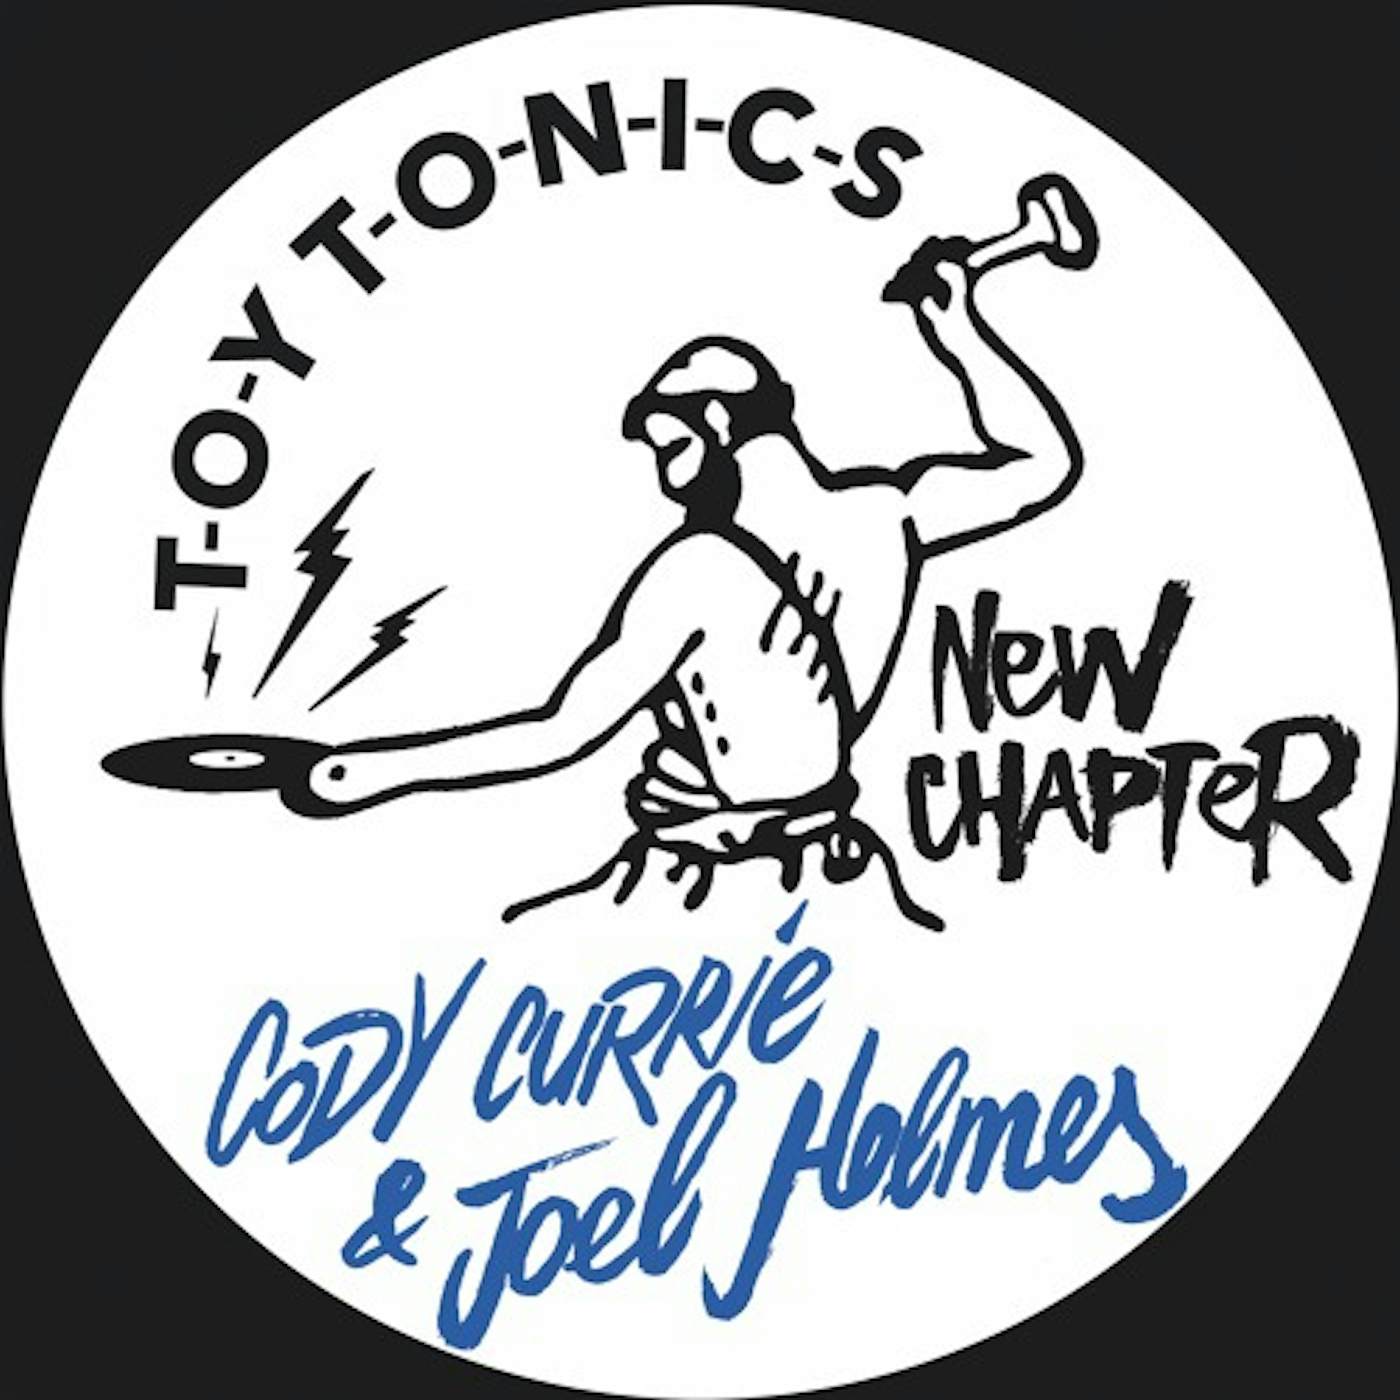 Cody Currie & Joel Holmes NEW CHAPTER Vinyl Record